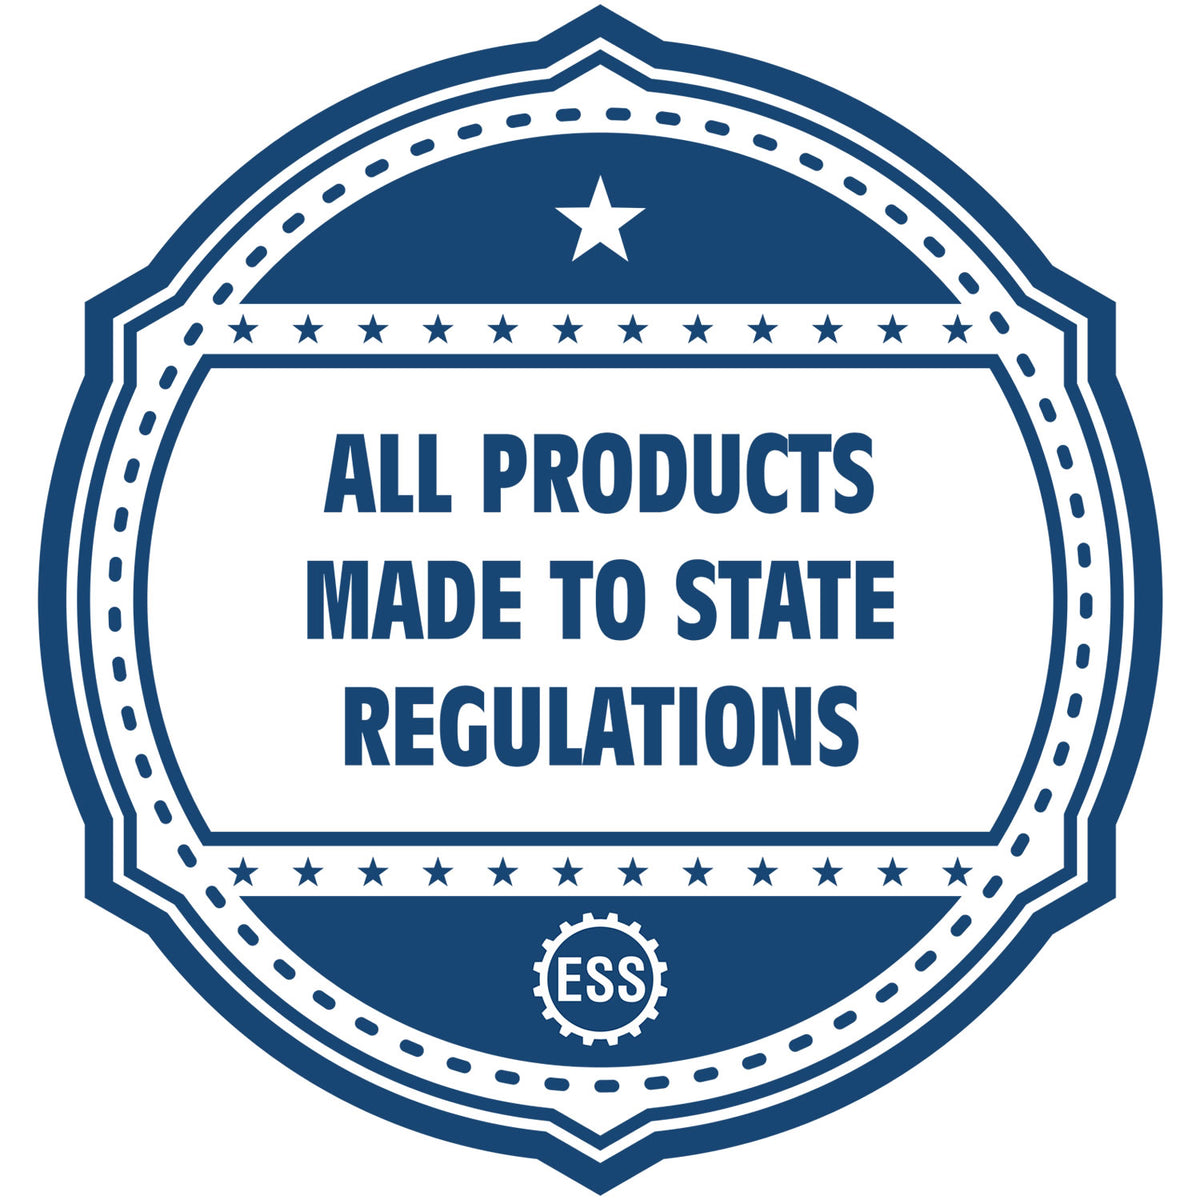 An icon or badge element for the Slim Pre-Inked Missouri Professional Engineer Seal Stamp showing that this product is made in compliance with state regulations.